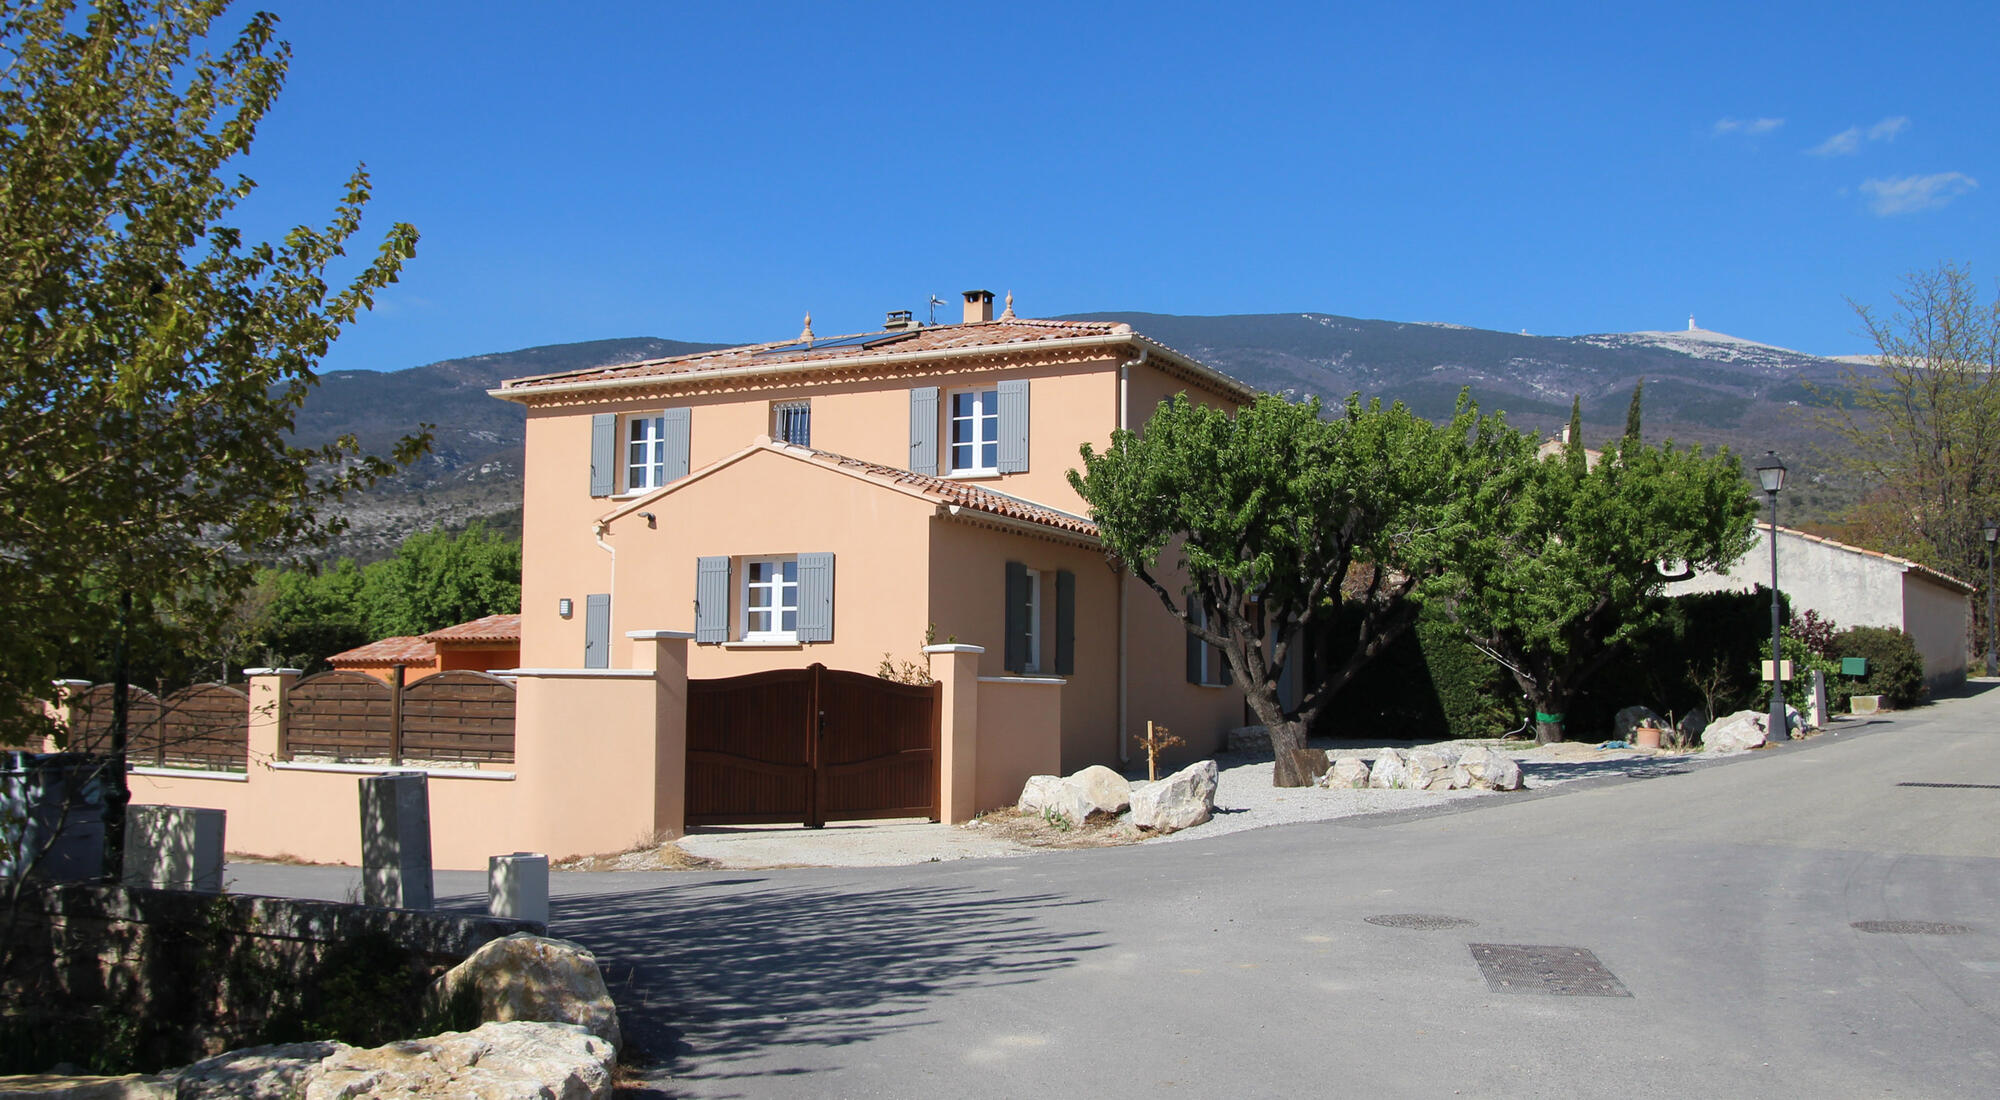 A hamlet at the foot of Mont Ventoux